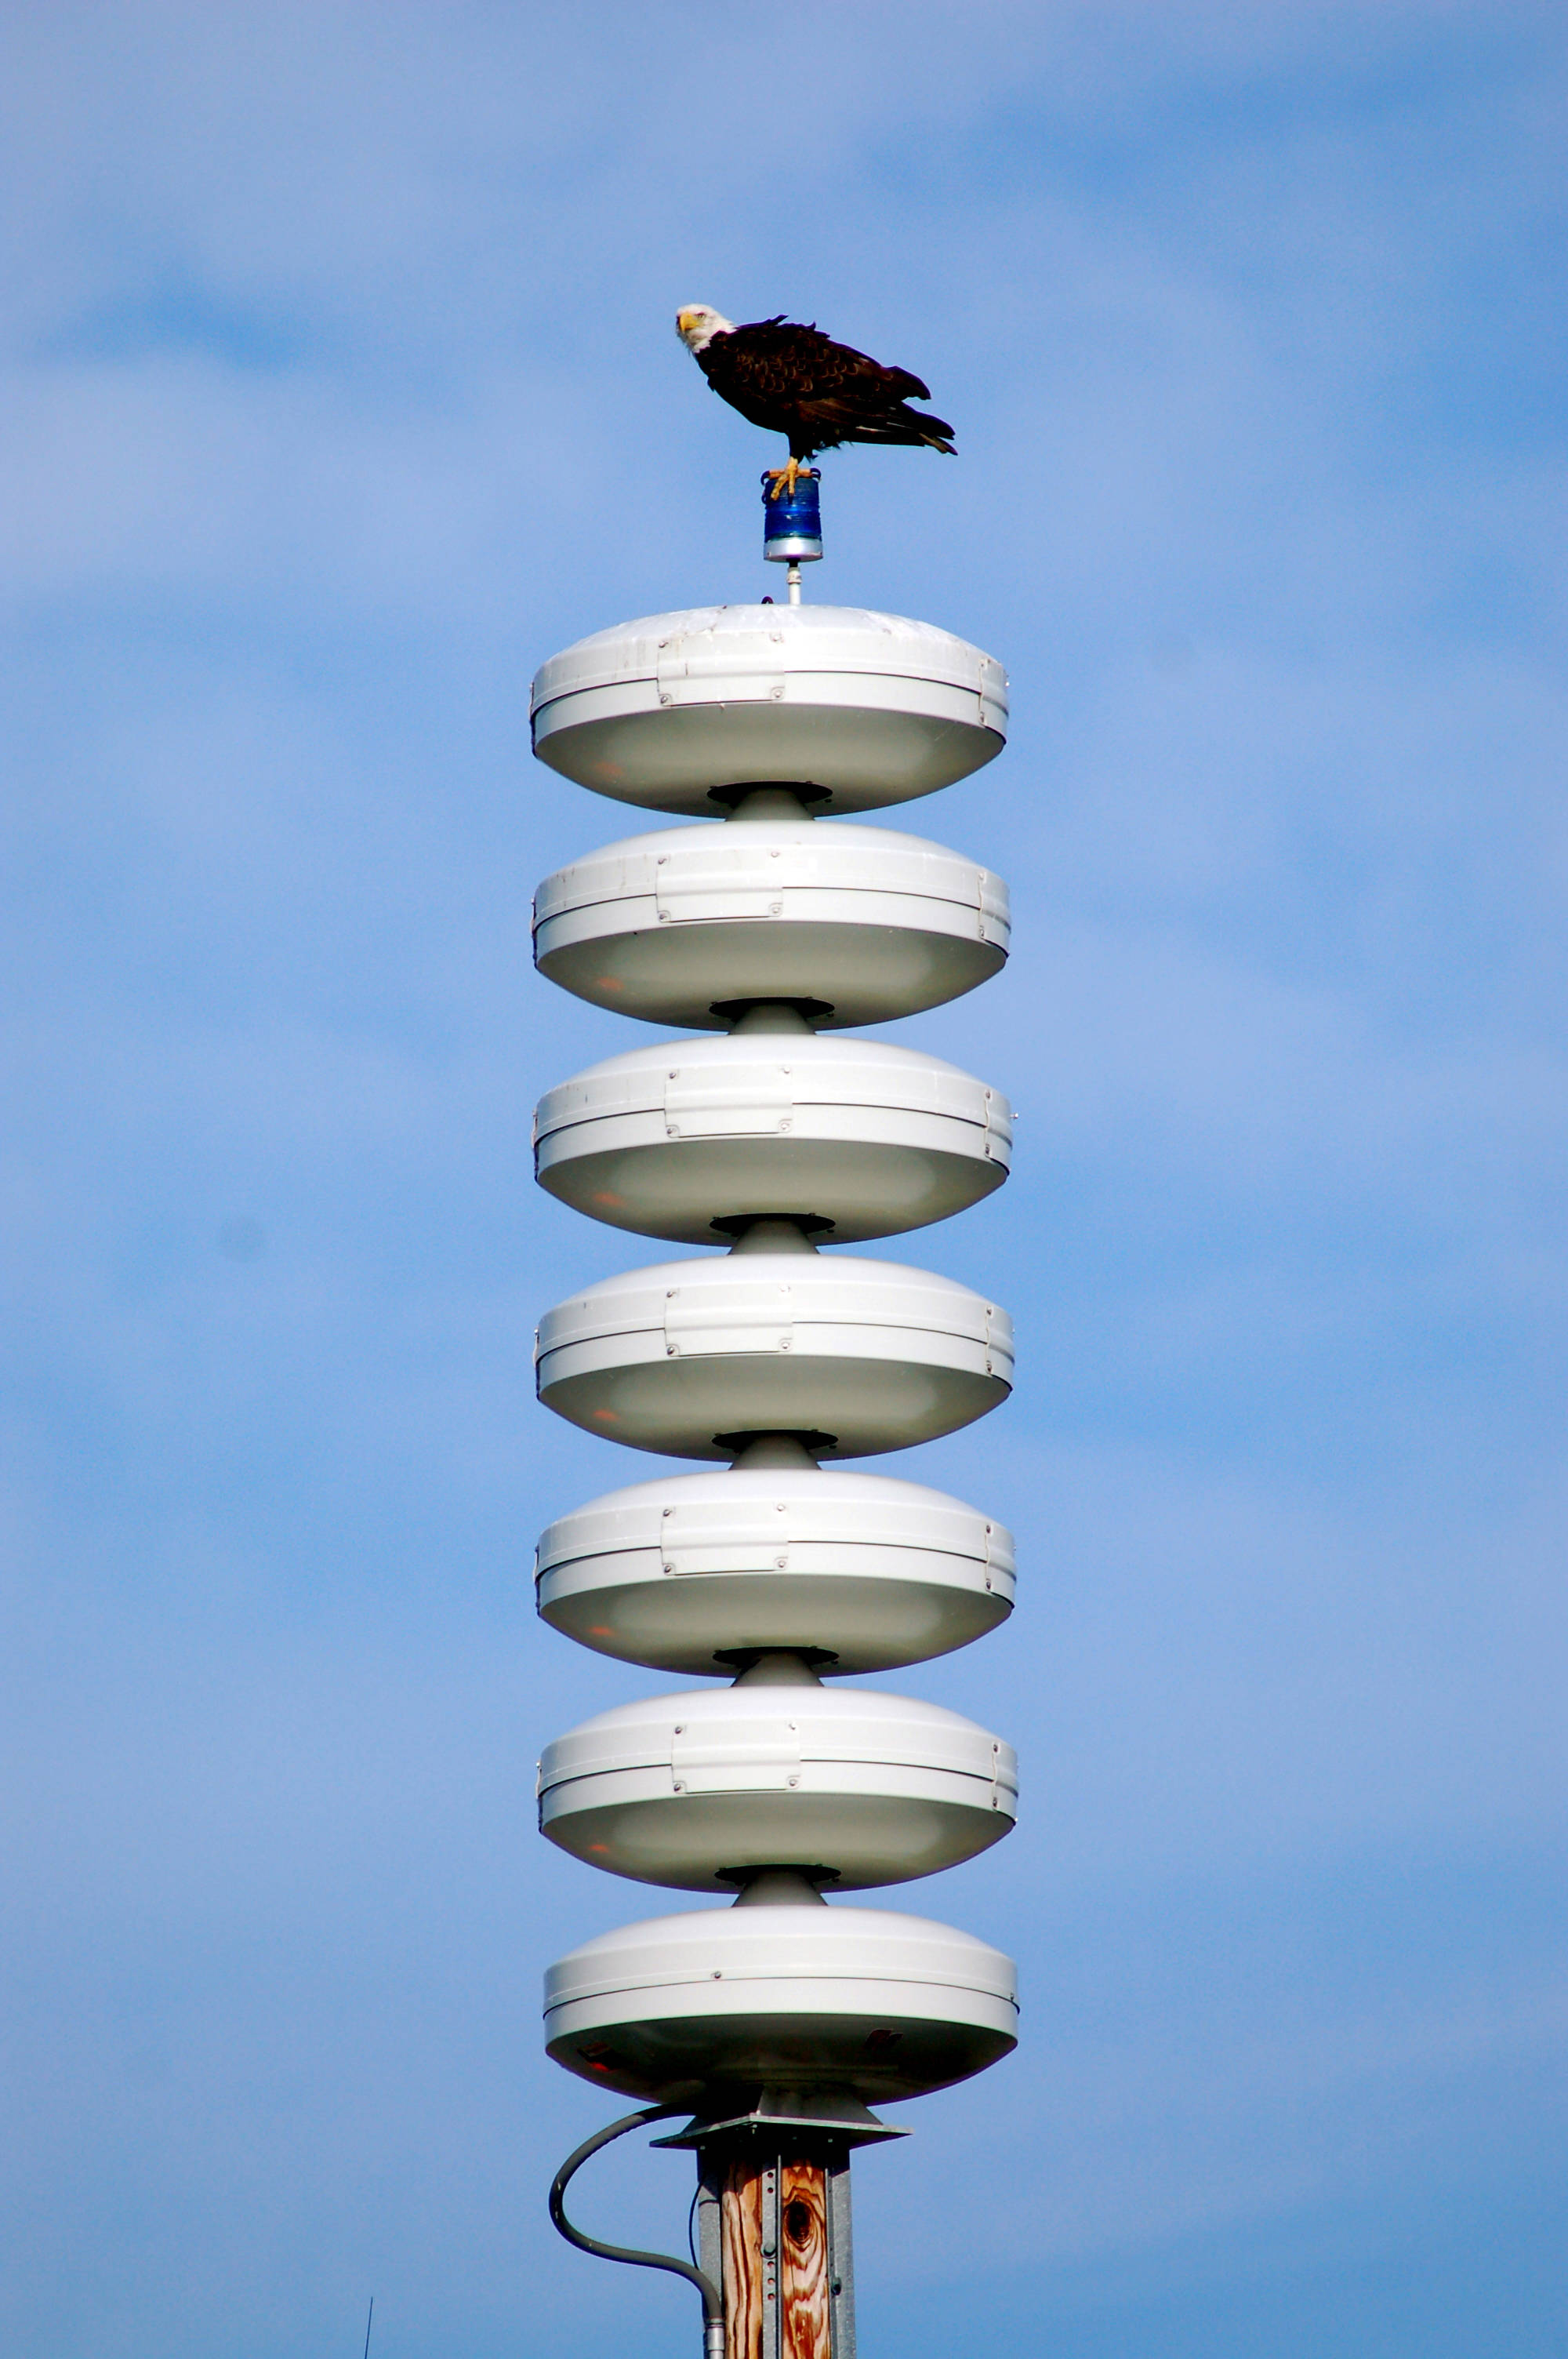 A bald eagle sits on top of a tsunami warning tower on the Homer Spit near Mariner Park on Tuesday morning, Sept. 2, 2014, after an error in the alert system caused a false tsunami warning. Towers like this situated in coastal Alaska towns are designed primarily to warn of tsunamis, but also can warn of other events, including possible nuclear missile attacks. (Homer News file photo by Michael Armstrong)